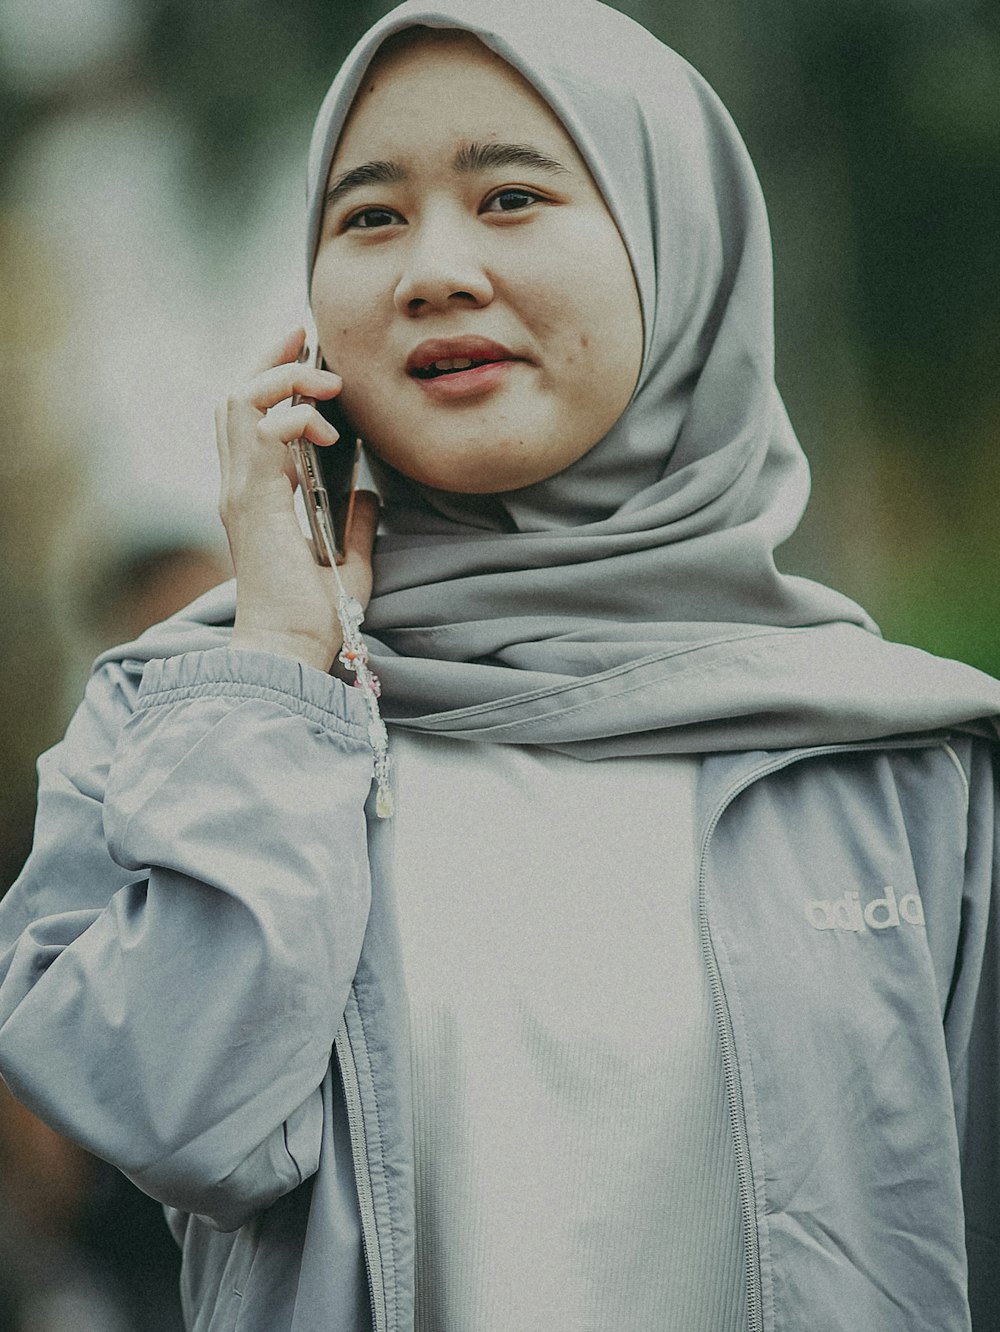 a woman in a hijab talking on a cell phone